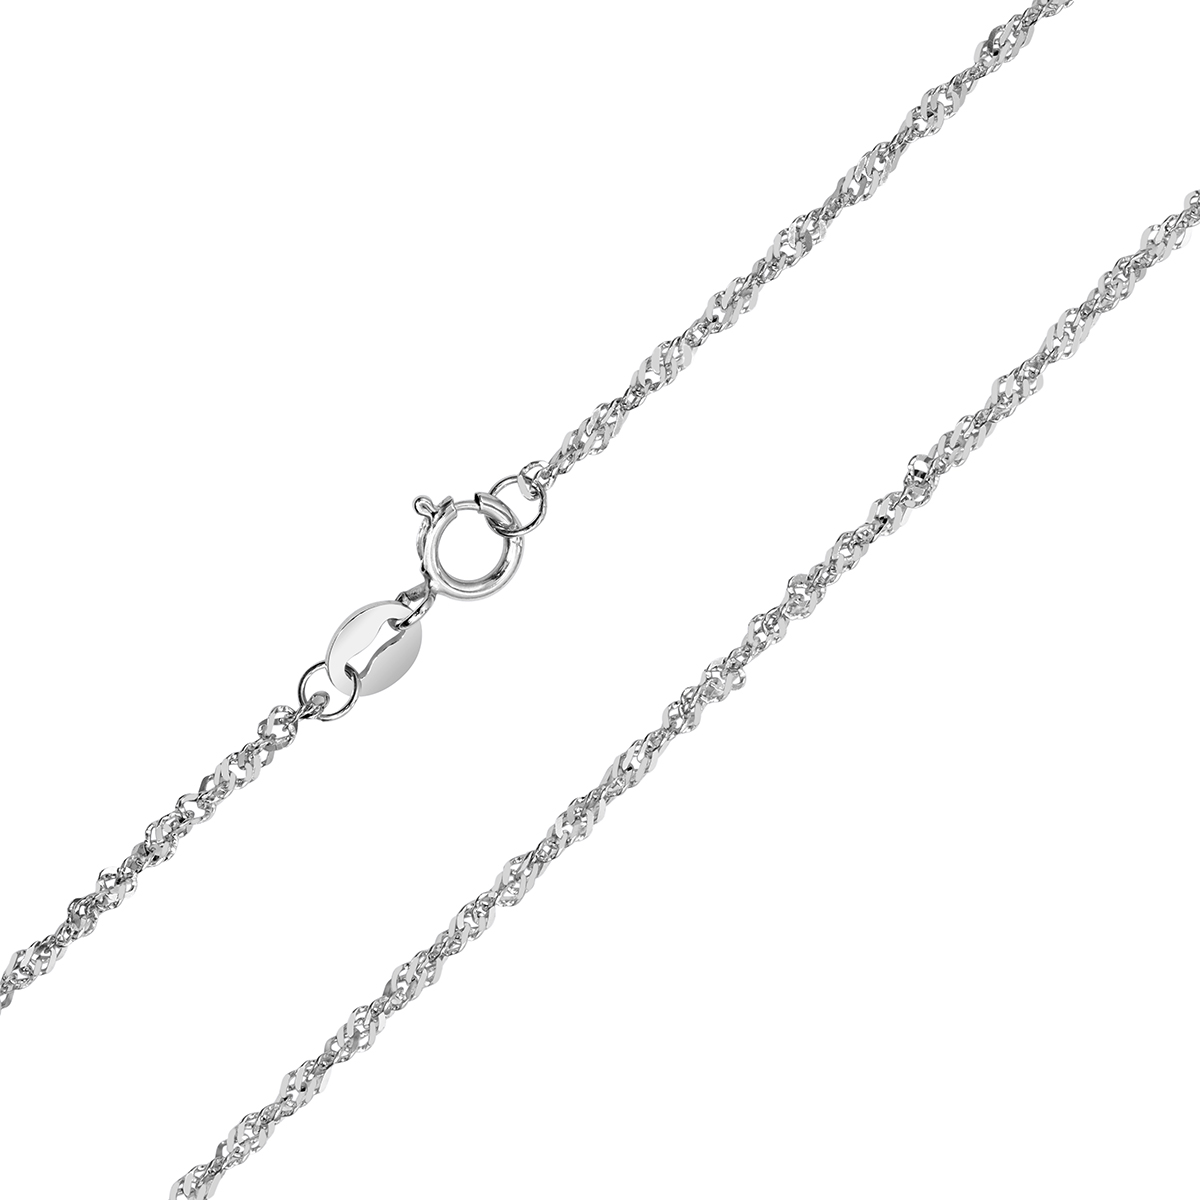 10K White Gold 1.5mm Singapore Rope Chain with Spring Ring Clasp - 16 Inch